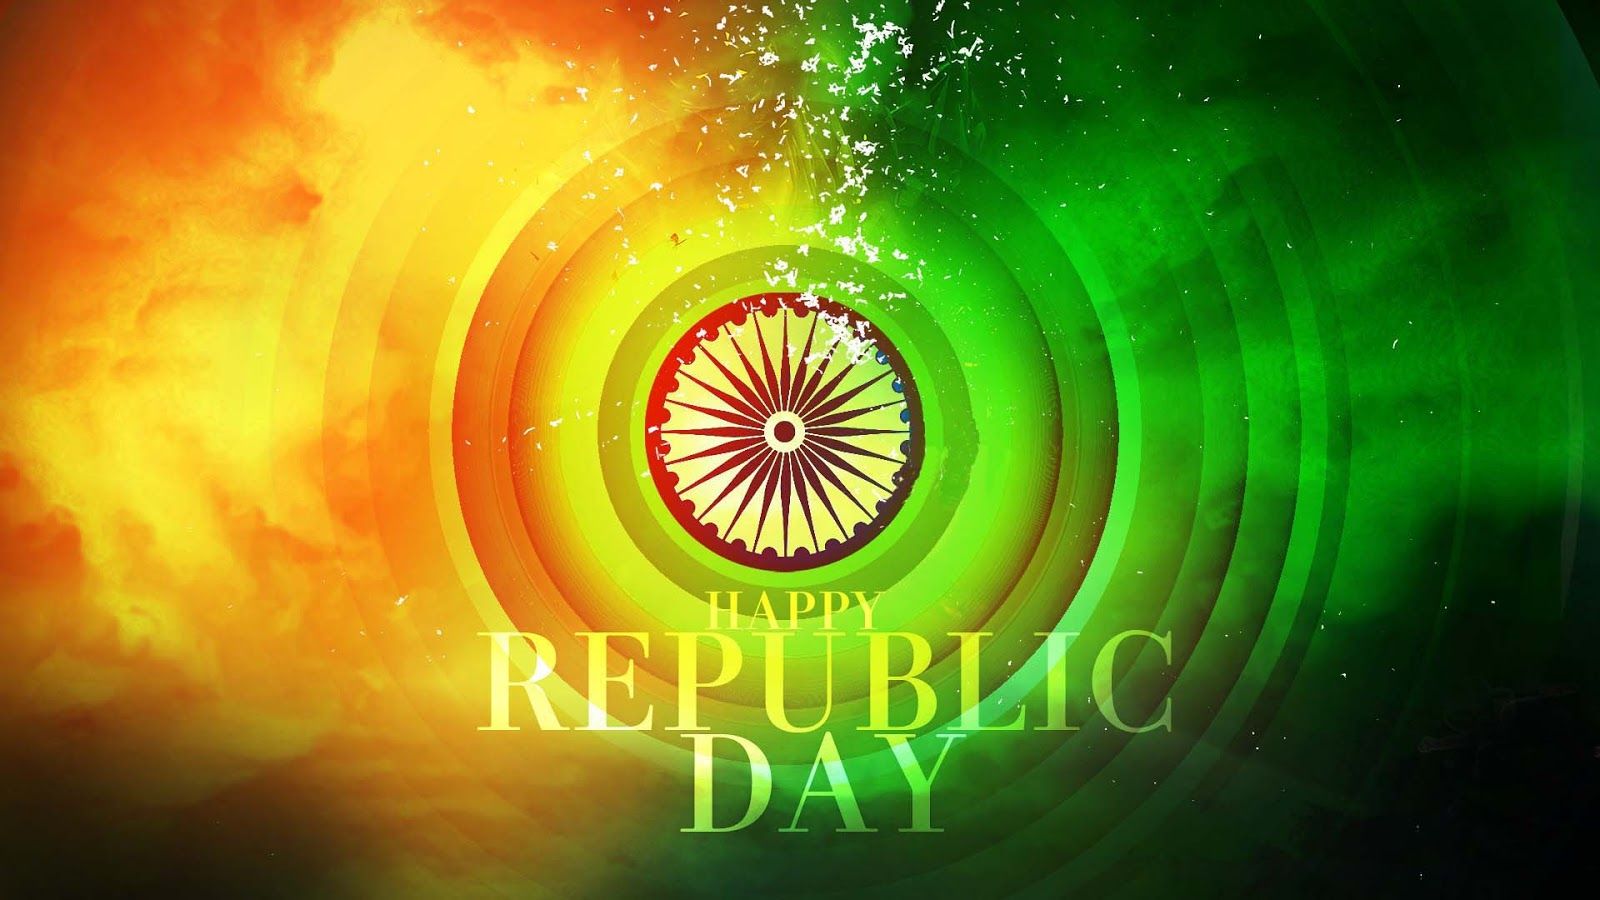 Republic Day 2022 Image. Happy Republic Day 2022 Image, Sms, Quotes, Wishes, Wallpaper, Shayri, Messages